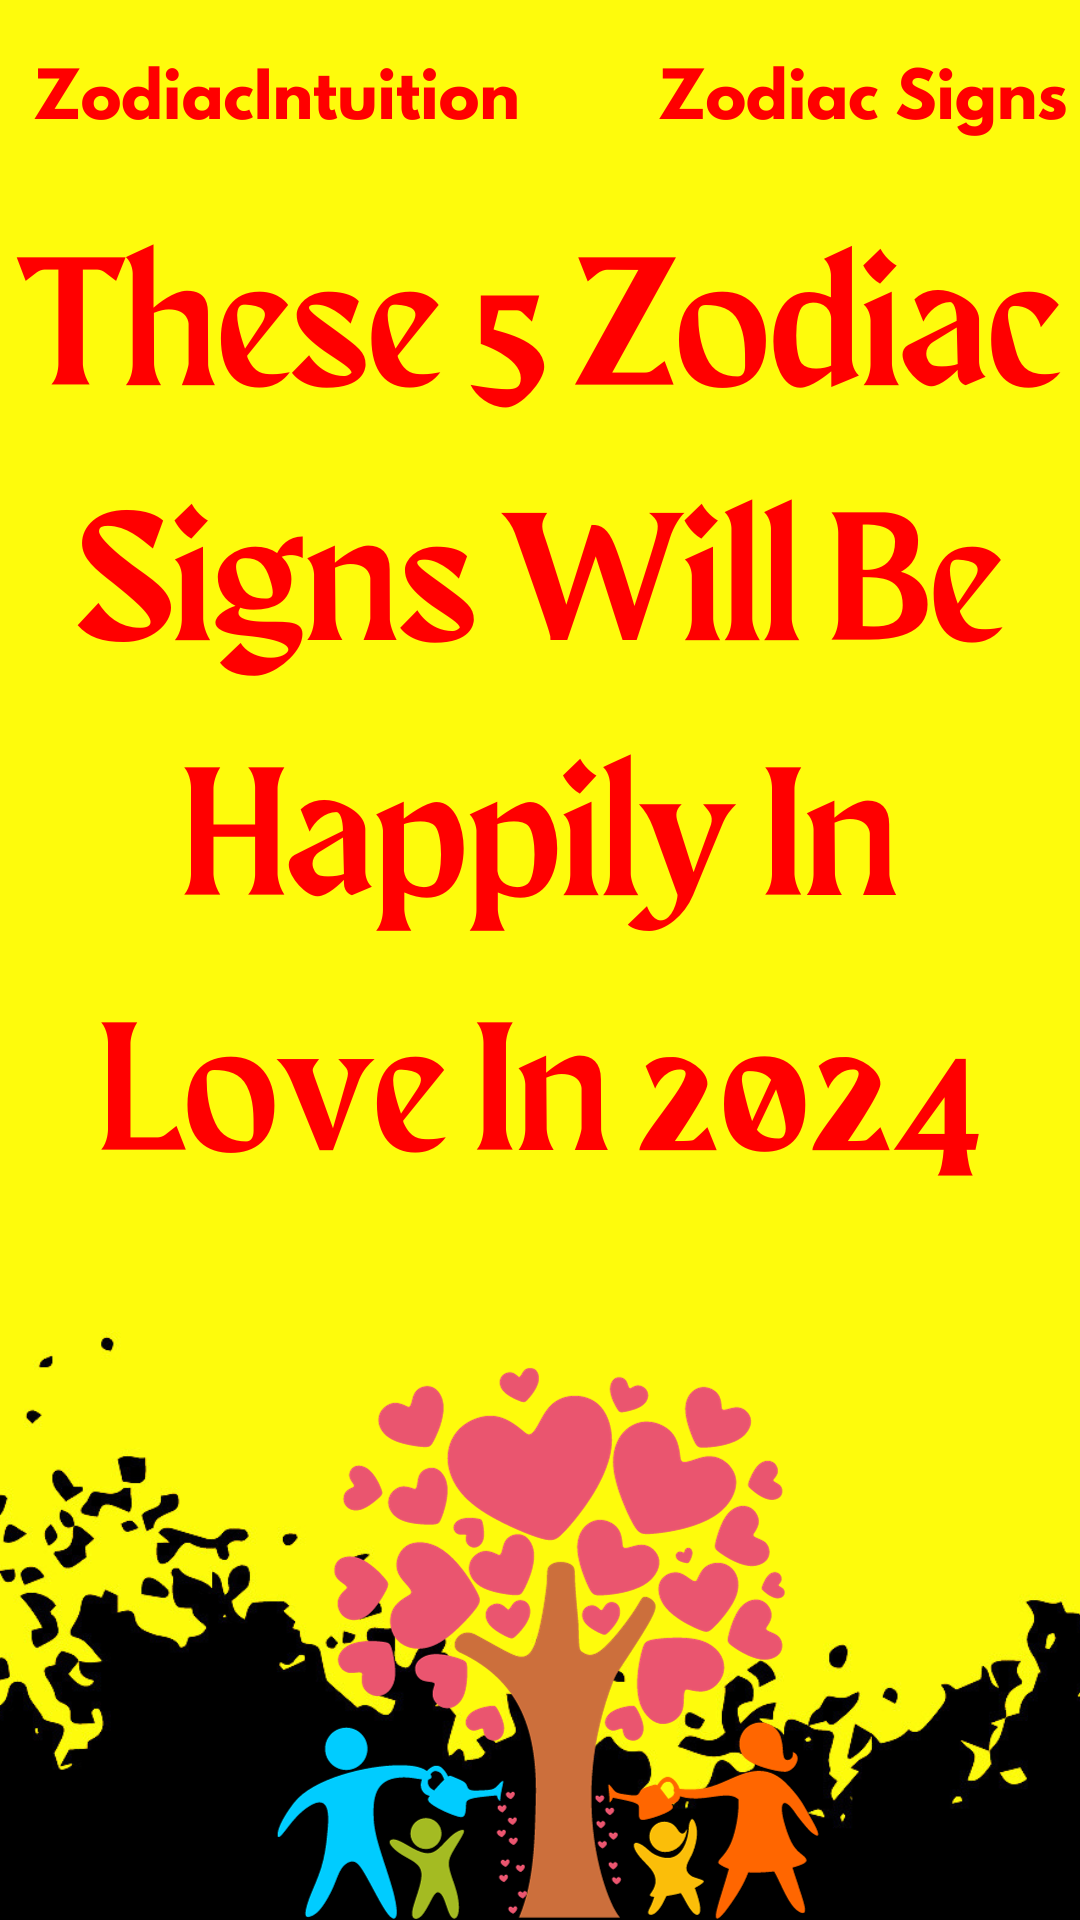 These 5 Zodiac Signs Will Be Happily In Love In 2024